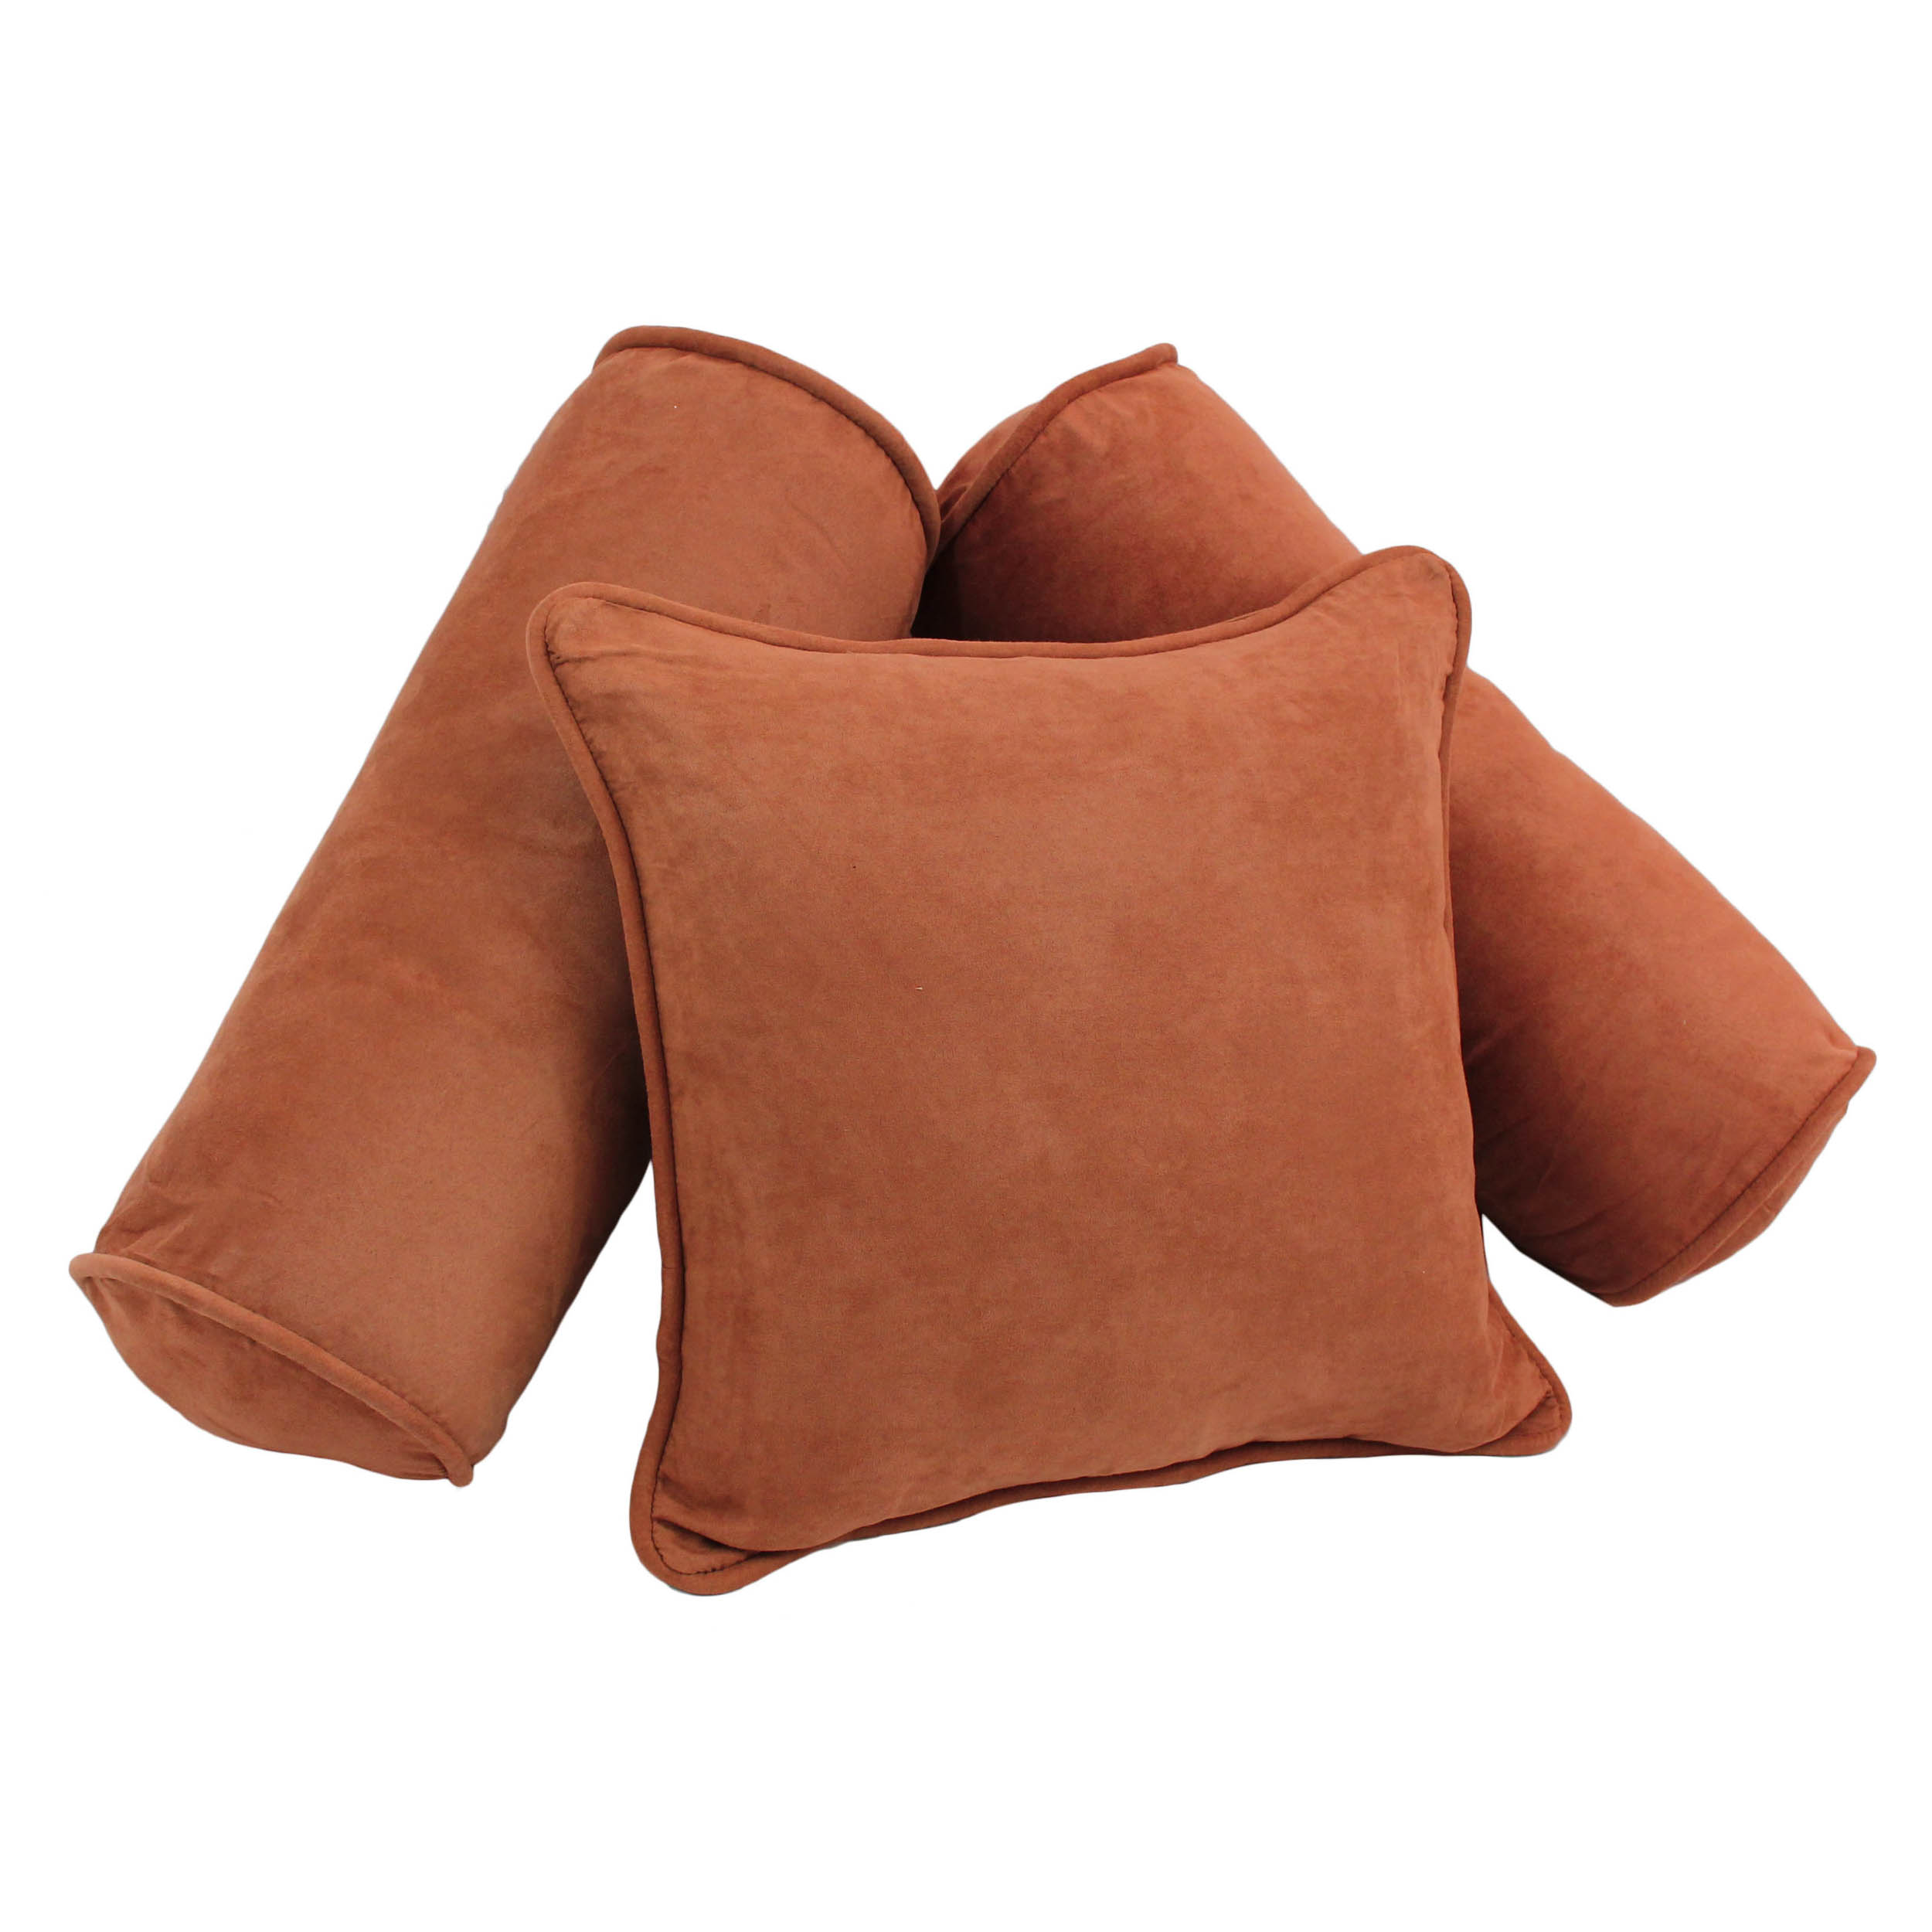 Blazing Needles Double-corded Solid Microsuede Throw Pillows with Inserts (Set of 3) - Spice